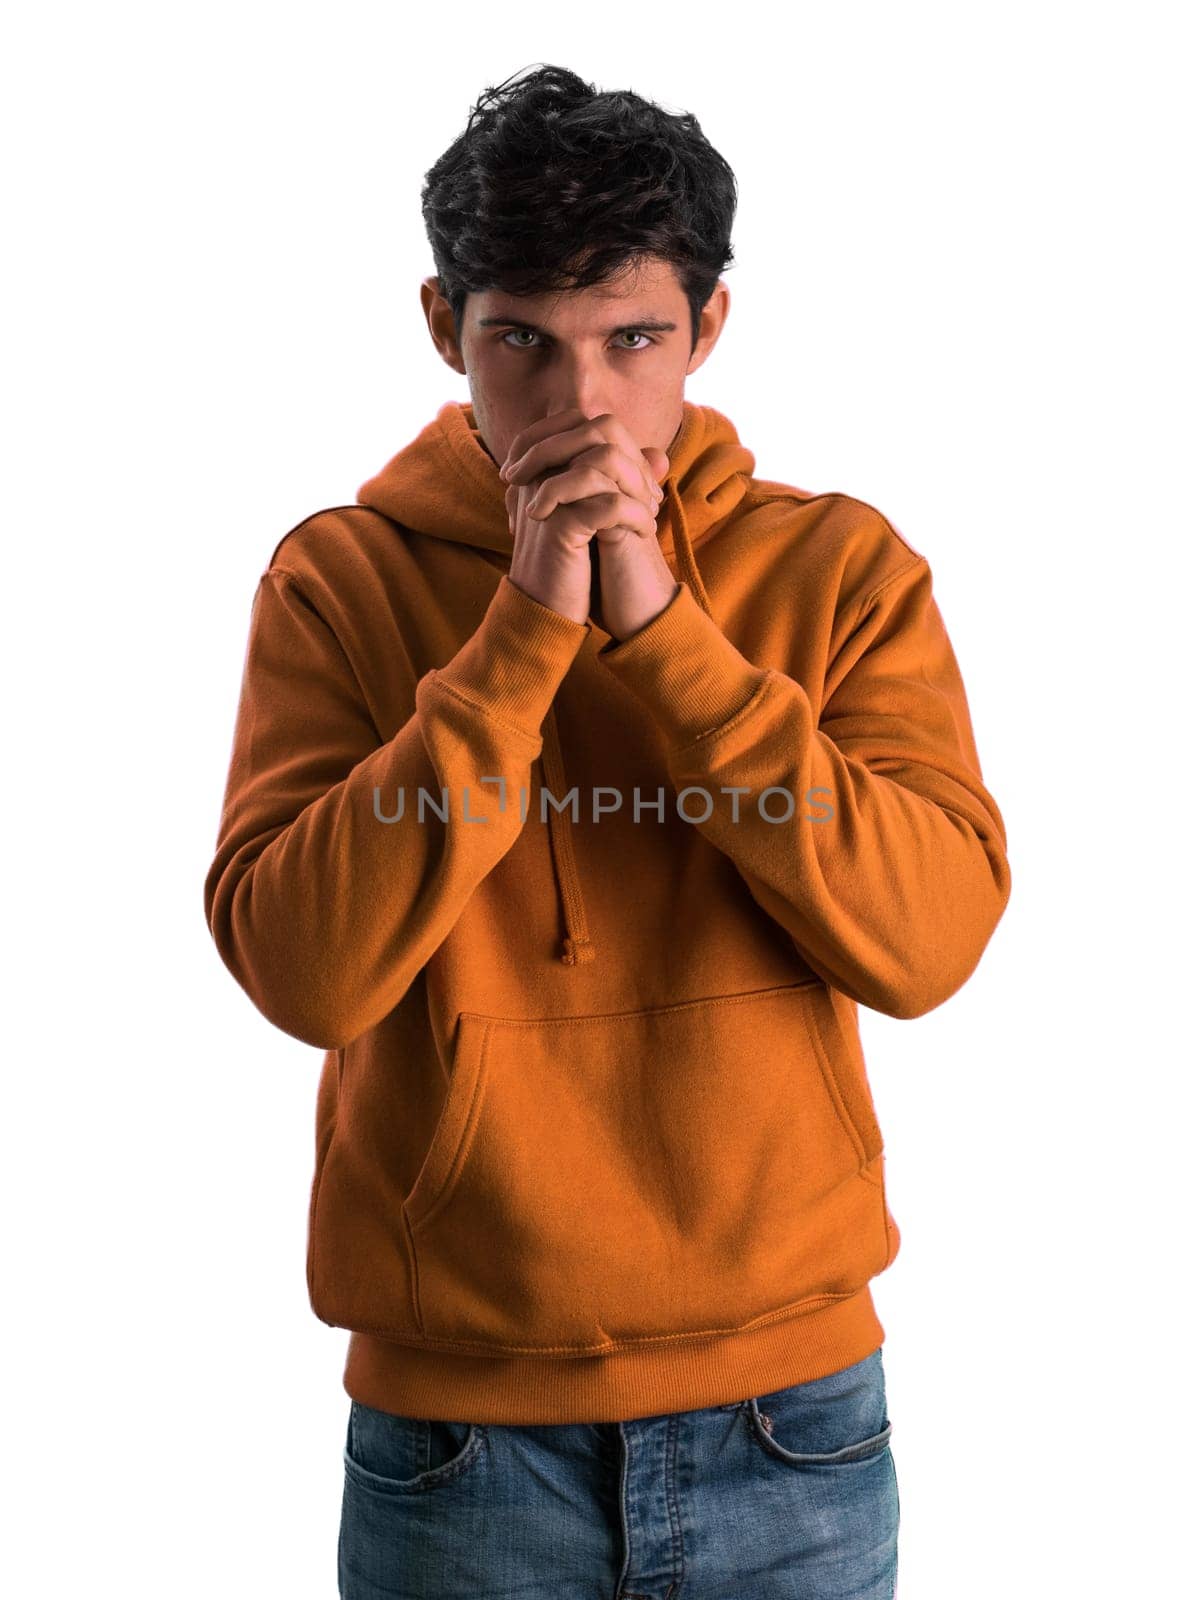 Man in orange hoodie with clasped hands by artofphoto